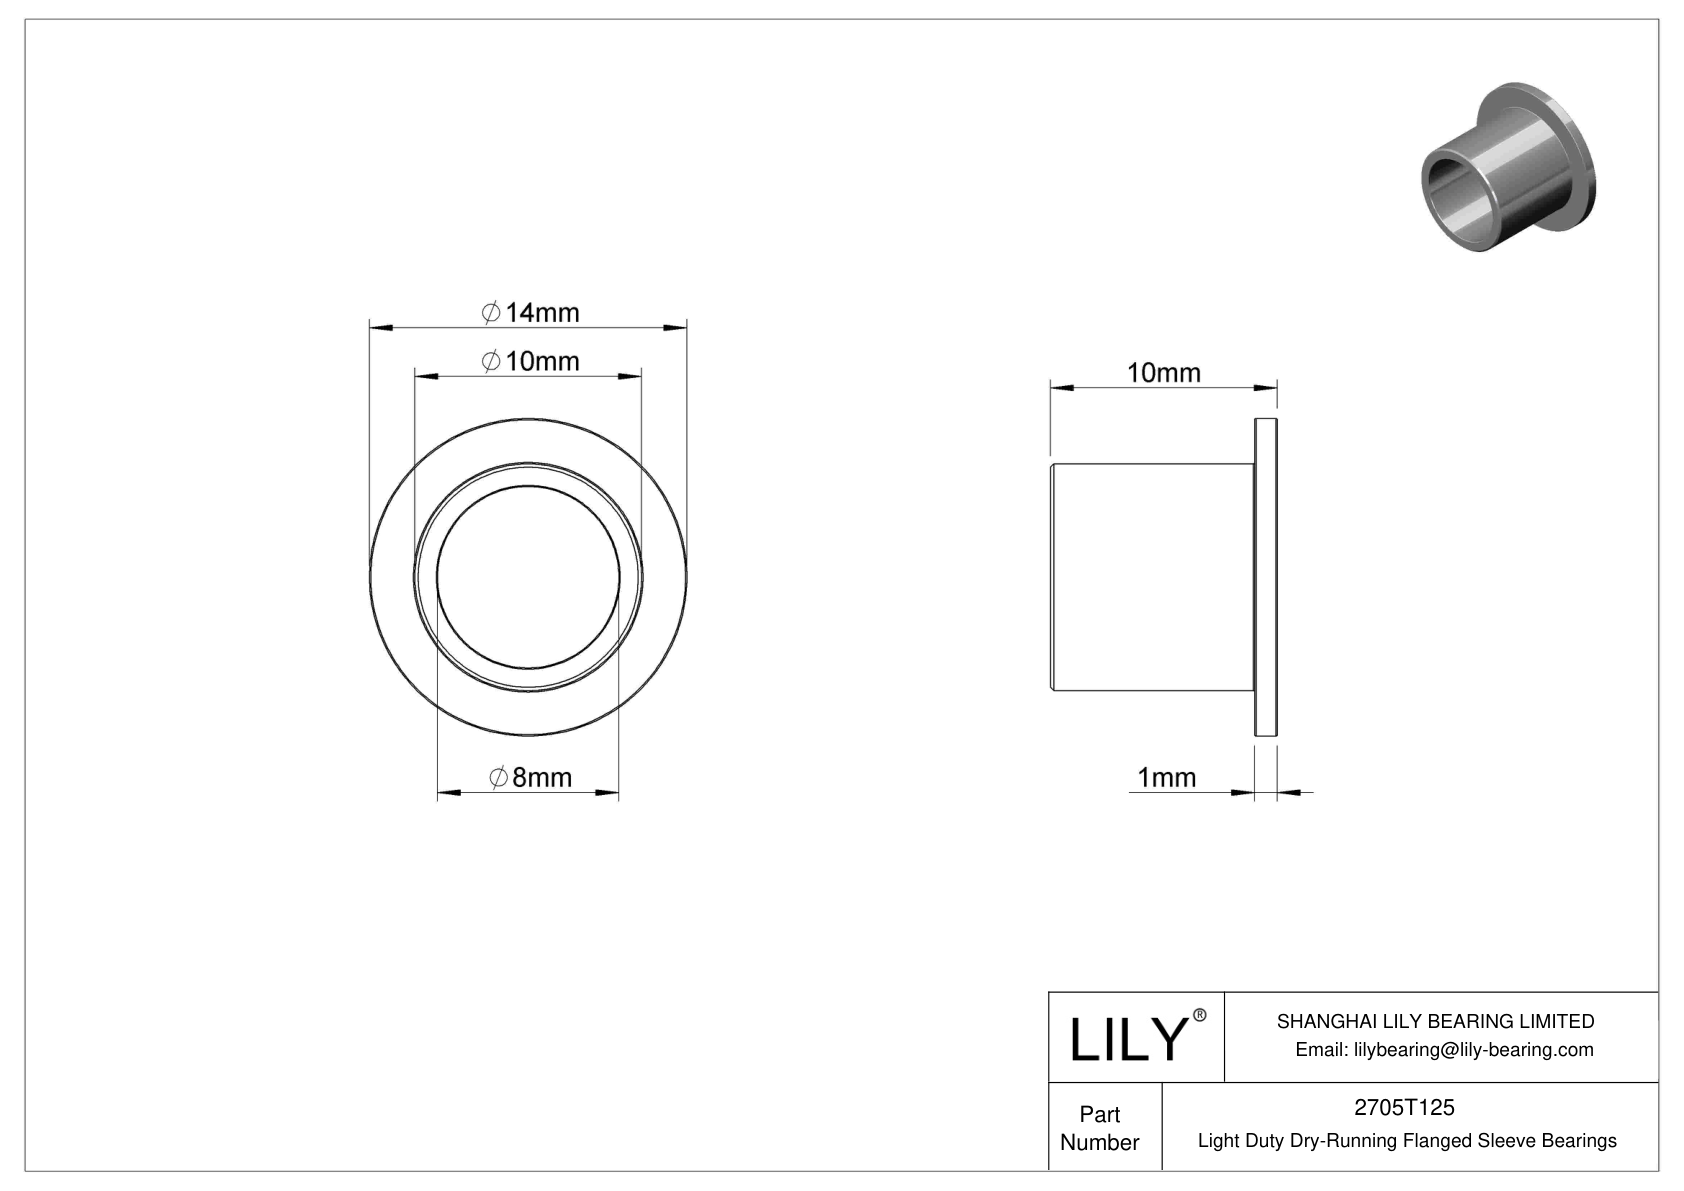 CHAFTBCF Light Duty Dry-Running Flanged Sleeve Bearings cad drawing